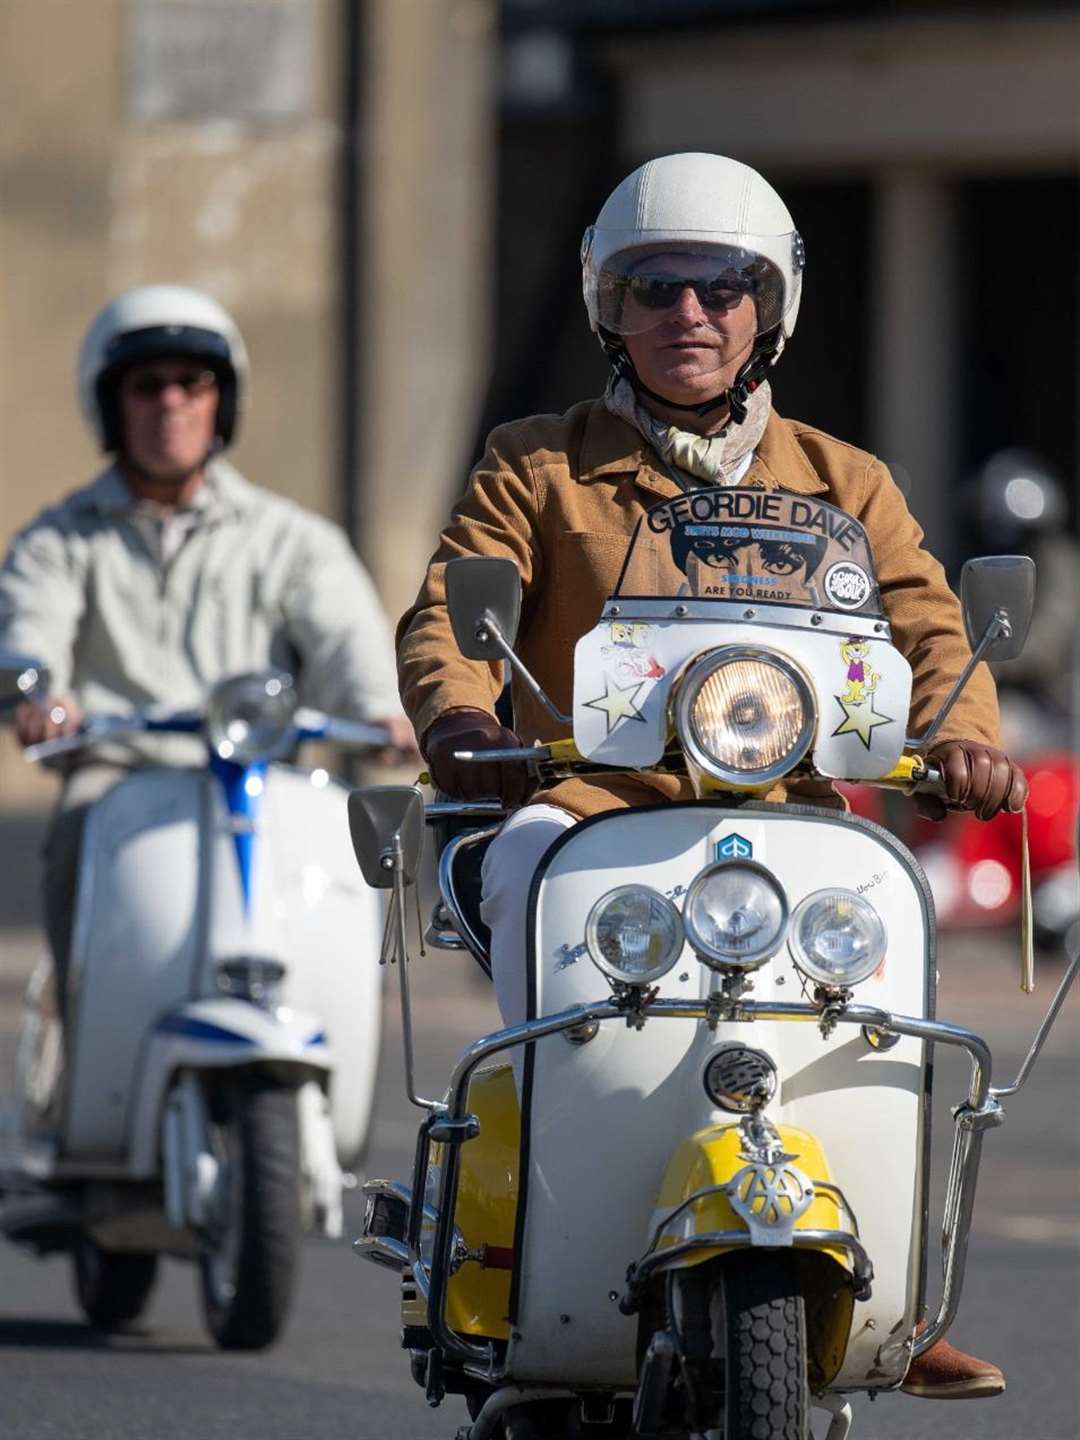 The Mods and Rockers Classic Scooter and Motorbike Meet returns to Lynn this Sunday